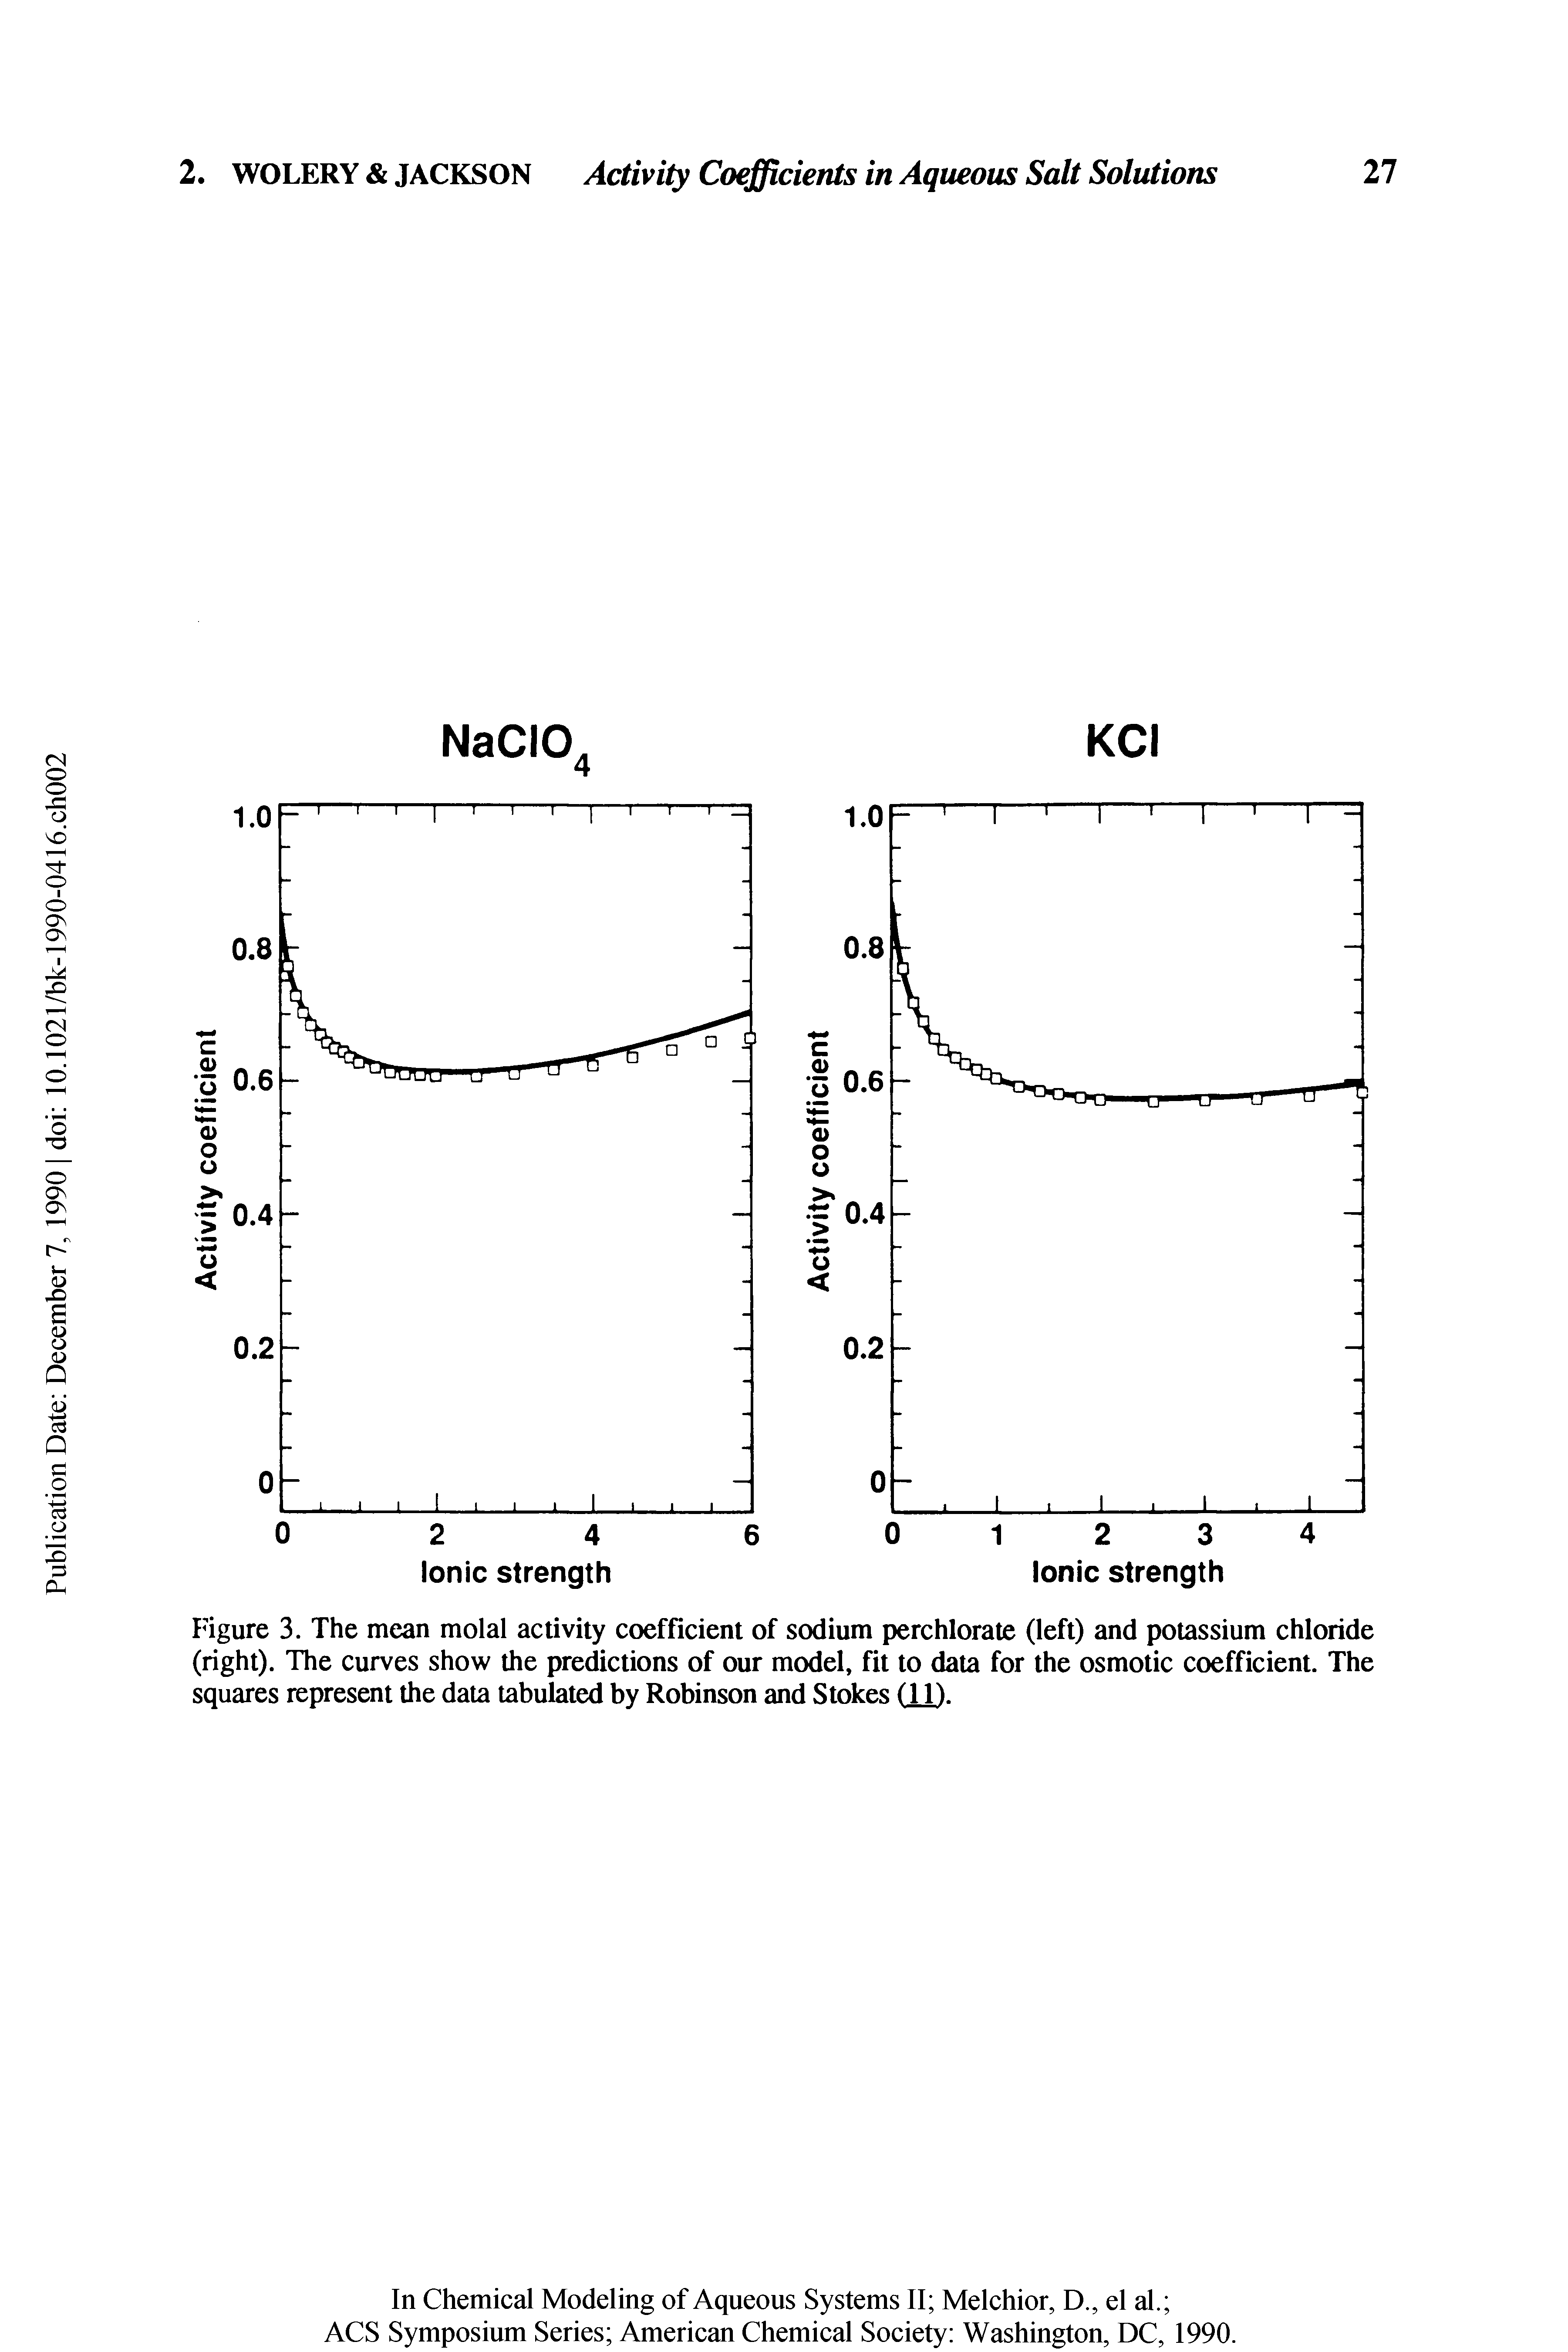 Figure 3. The mean molal activity coefficient of sodium perchlorate (left) and potassium chloride (right). The curves show the predictions of our model, fit to data for the osmotic coefficient. The squares represent the data tabulated by Robinson and Stokes (11).